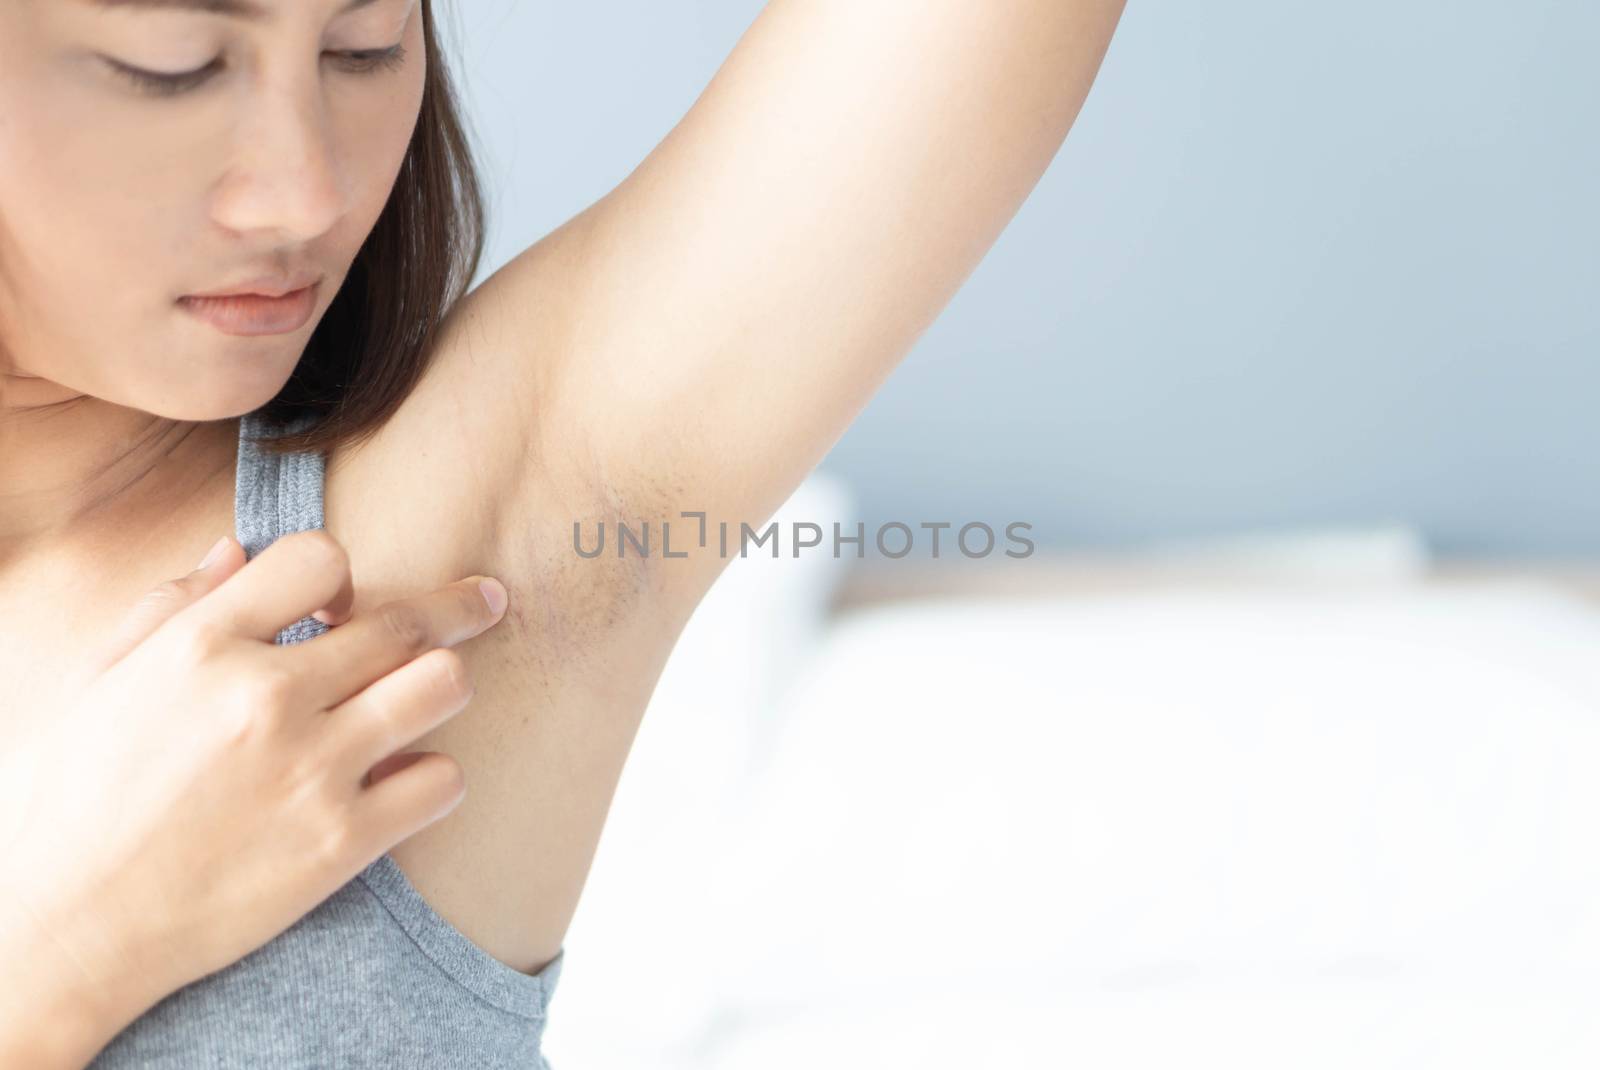 Women problem black armpit lying on white bed background for skin care and beauty concept, selective focus